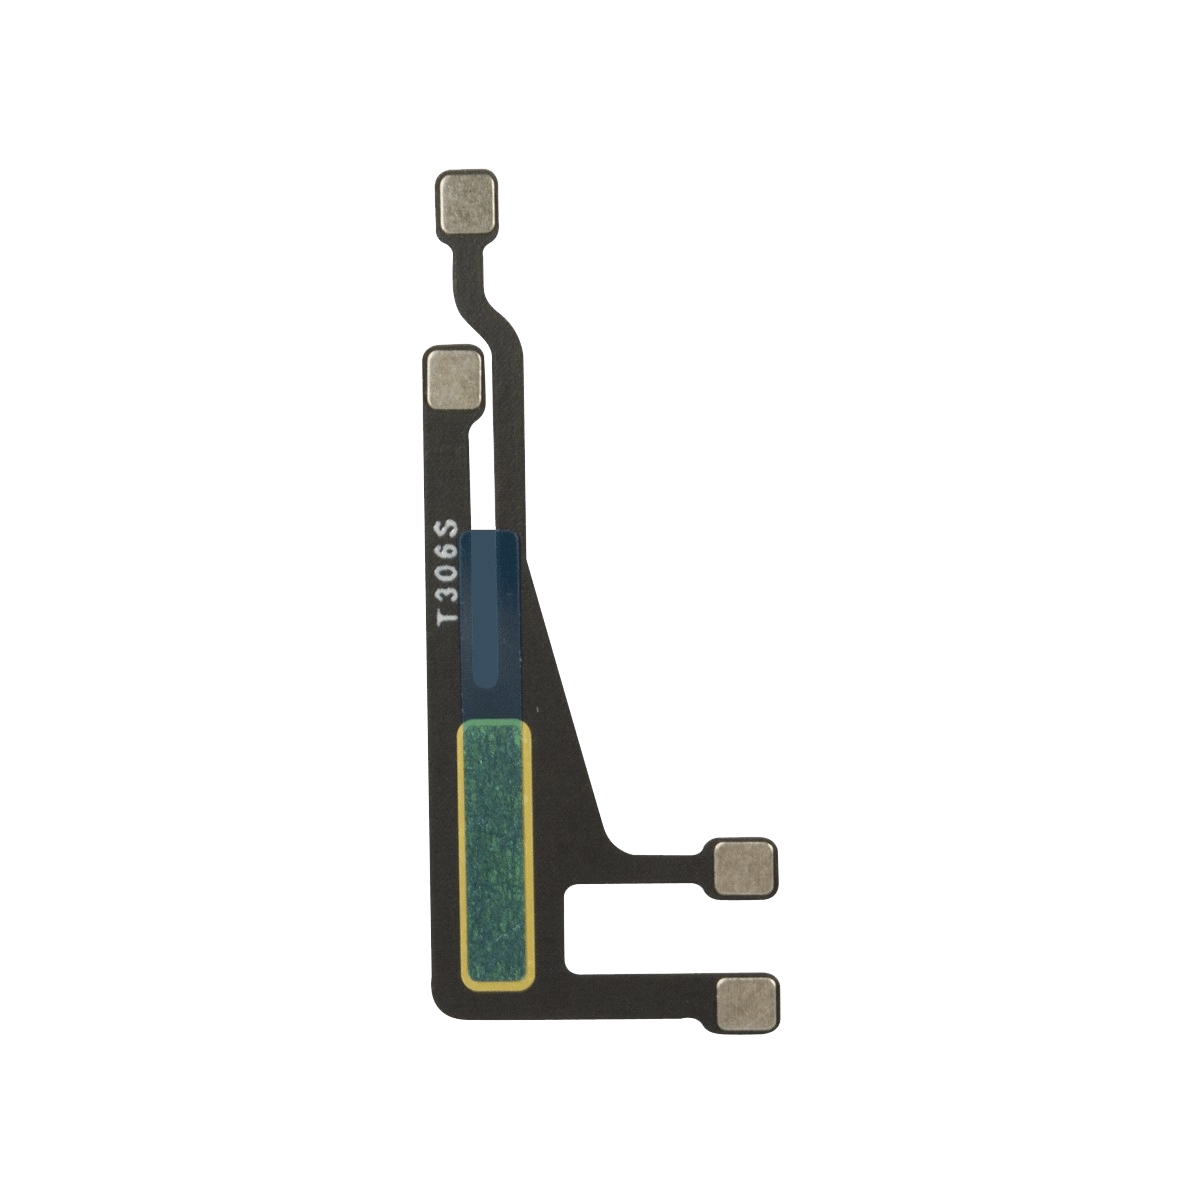 iPhone 6 Motherboard Connector Cable Replacement